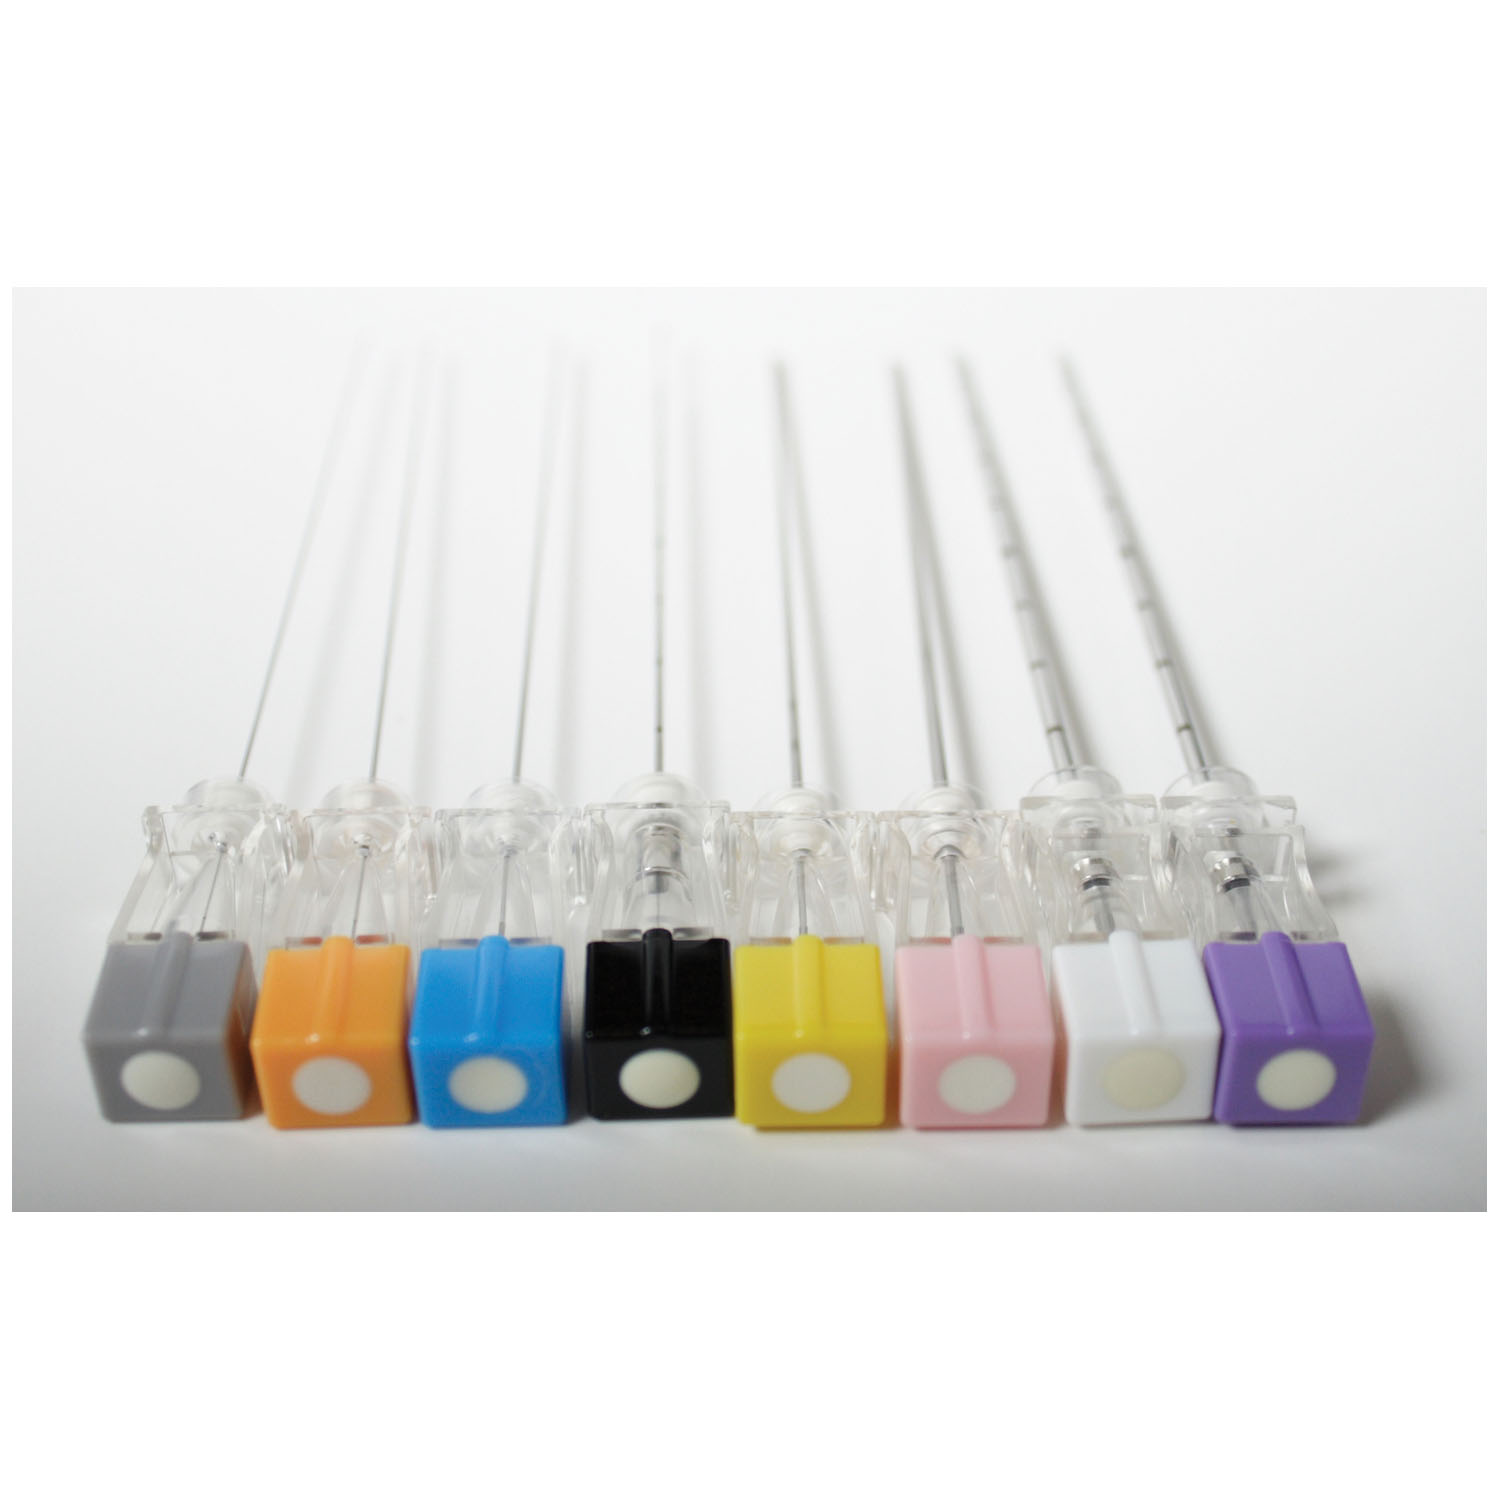 MYCO RELI® PENCIL POINT SPINAL NEEDLES : PP27G351 BX